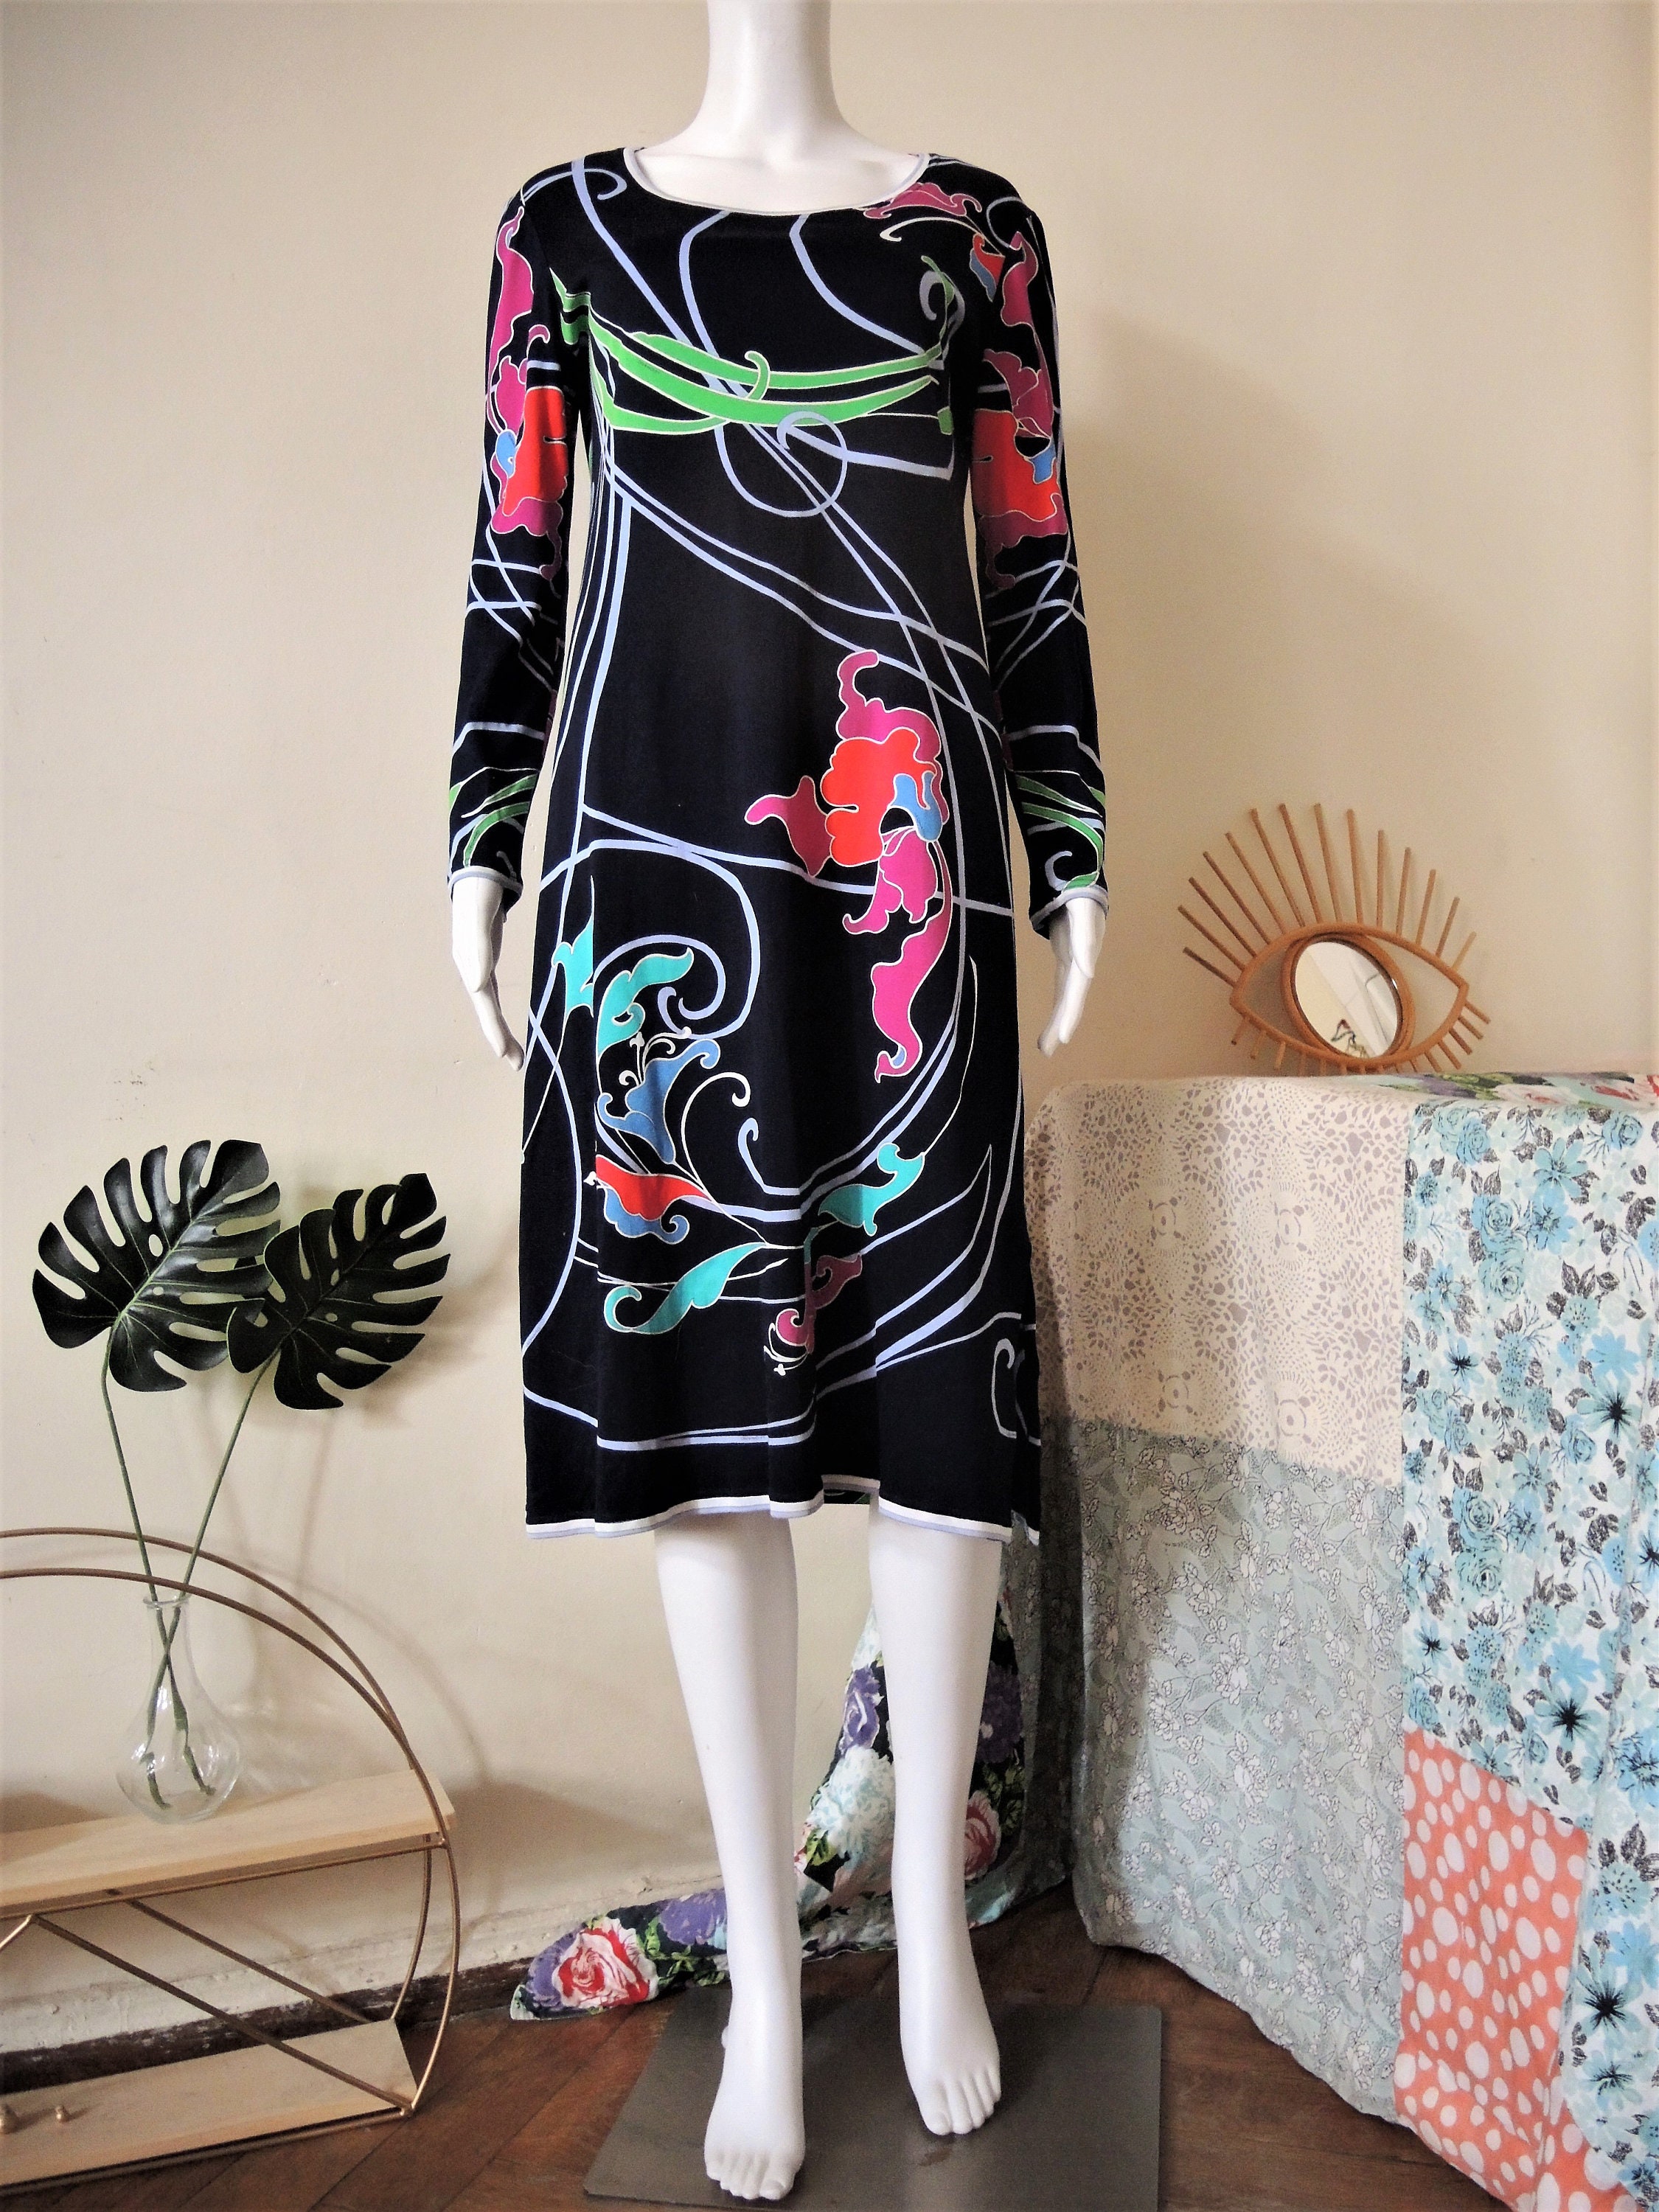 Dress Tropical Vintage Made 1990s Etsy Italy in Jersey - Paris Midi and Orchid Leonard Pattern With Studio Belt Tie 90s